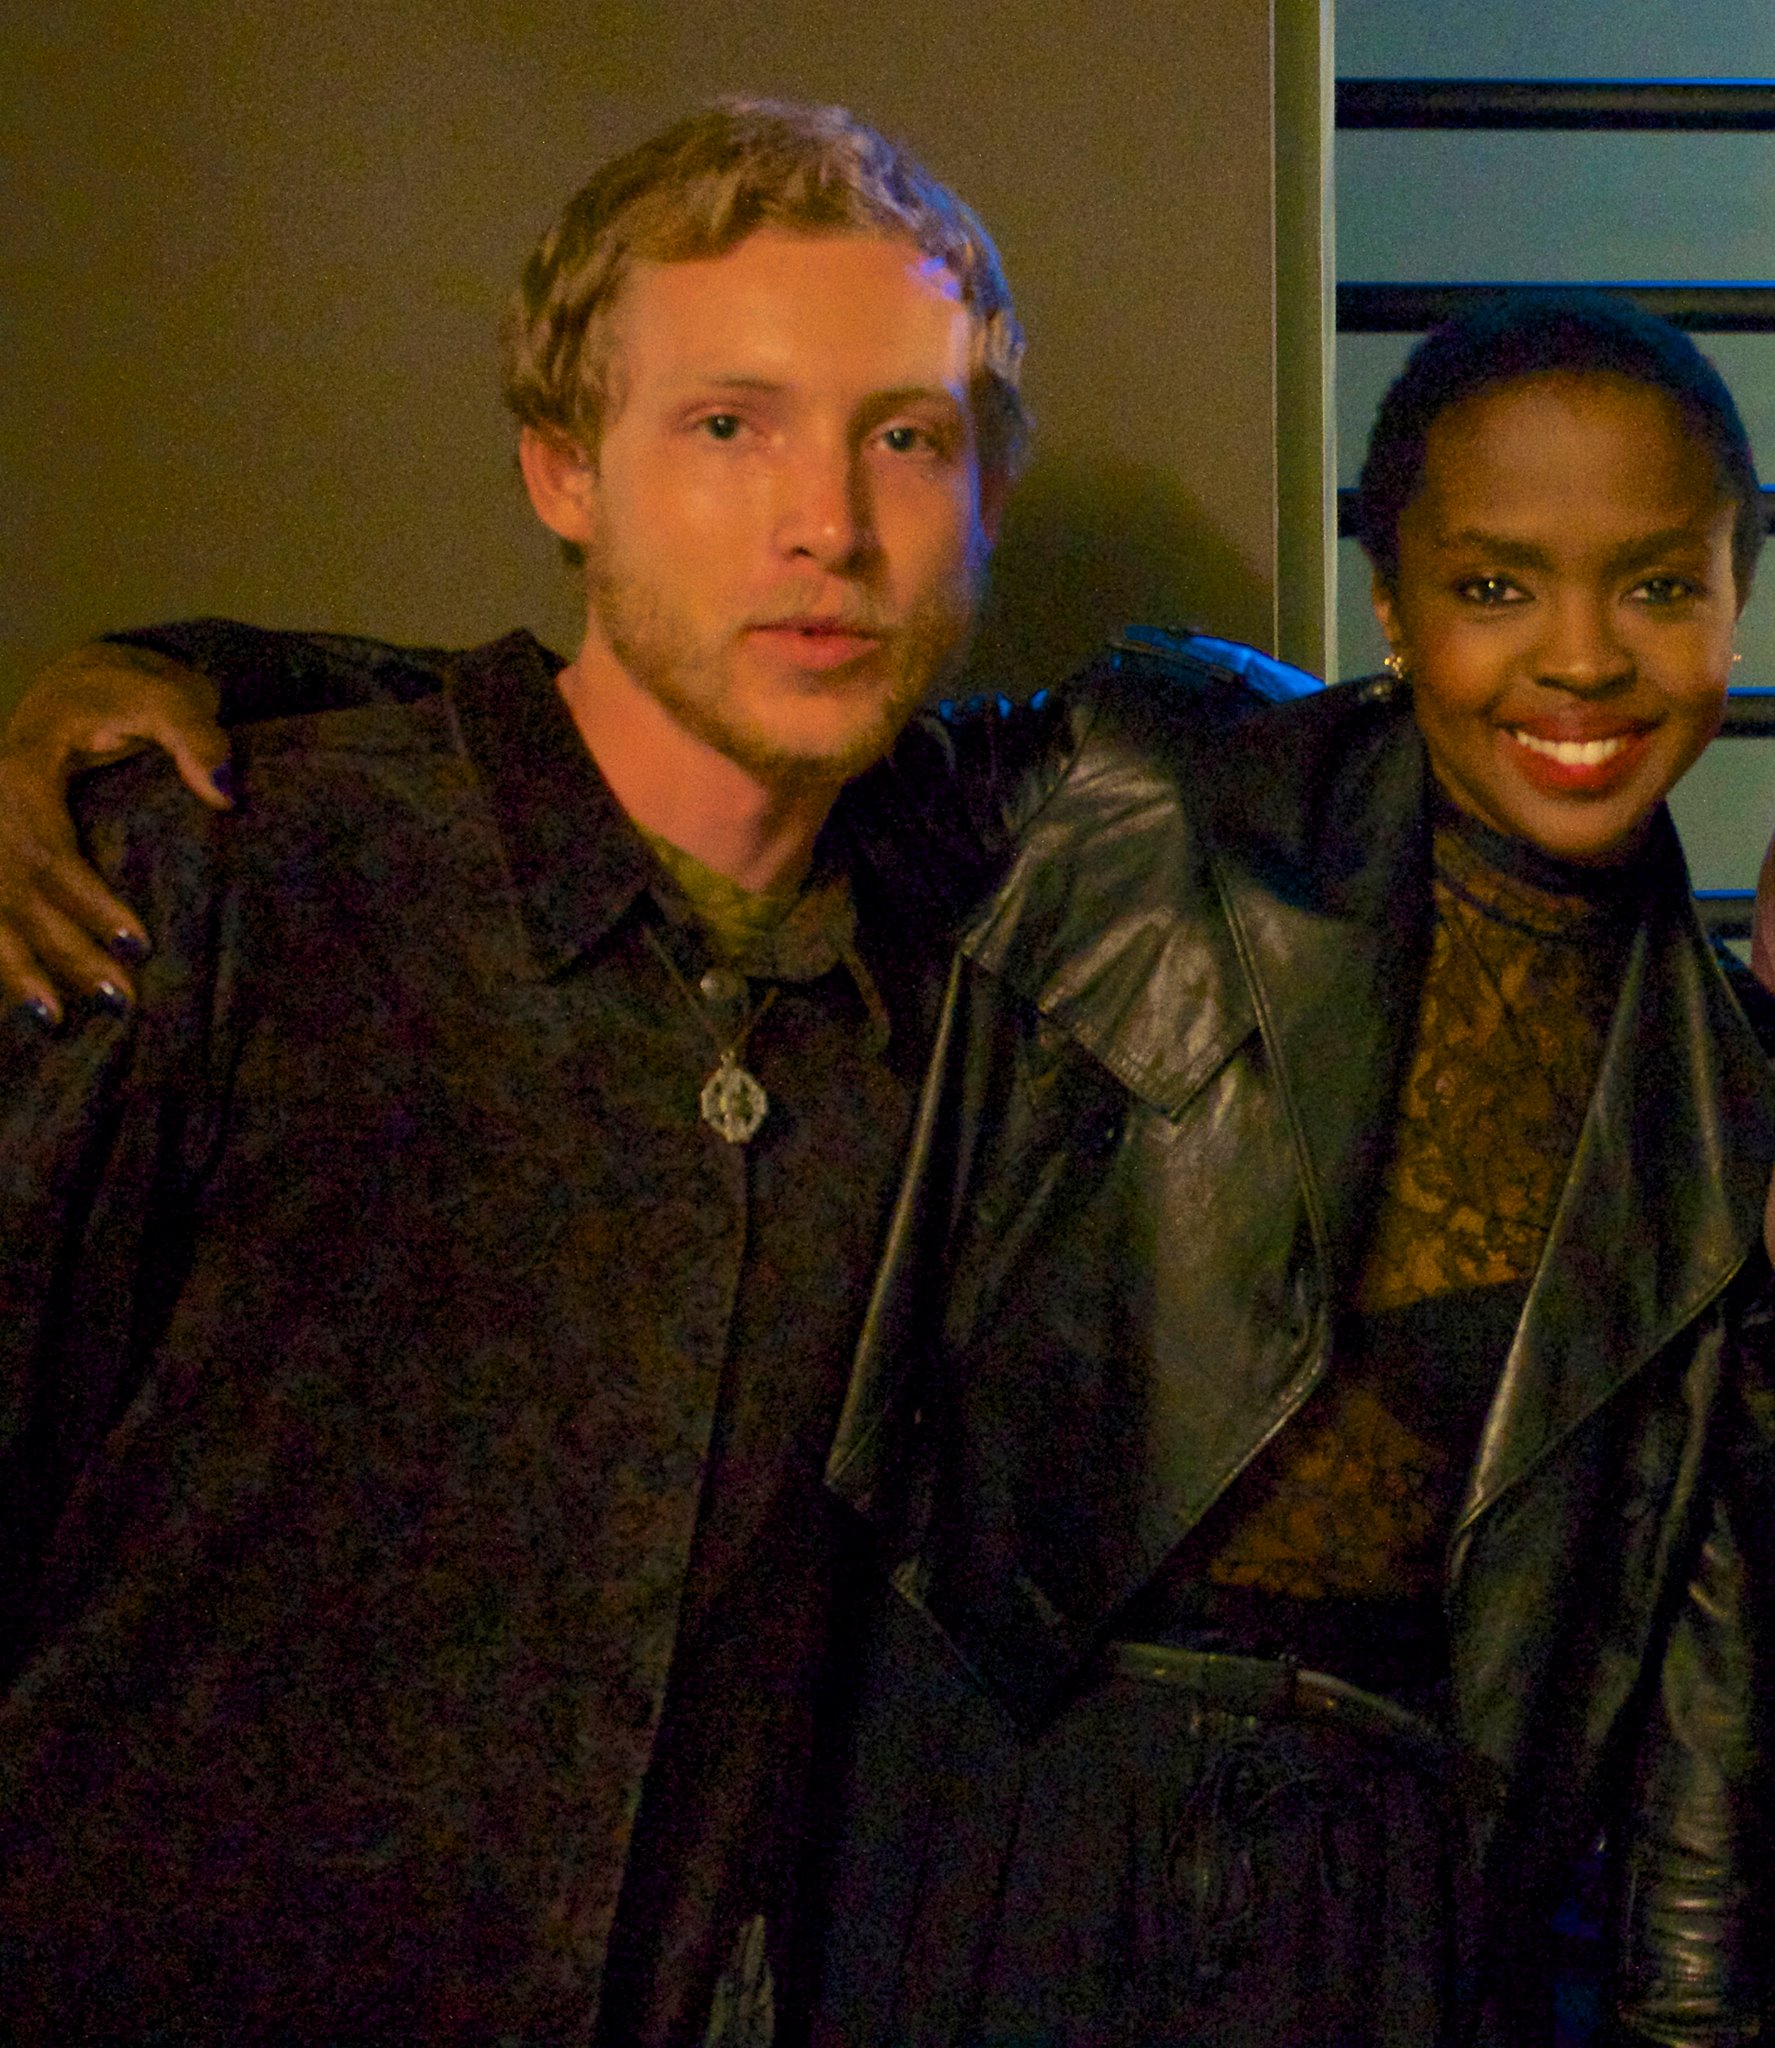 Lauryn Hill and me in LA Live, Nokia Theatre. I directed her first music video in ten years. It's called 'Consumerism.'